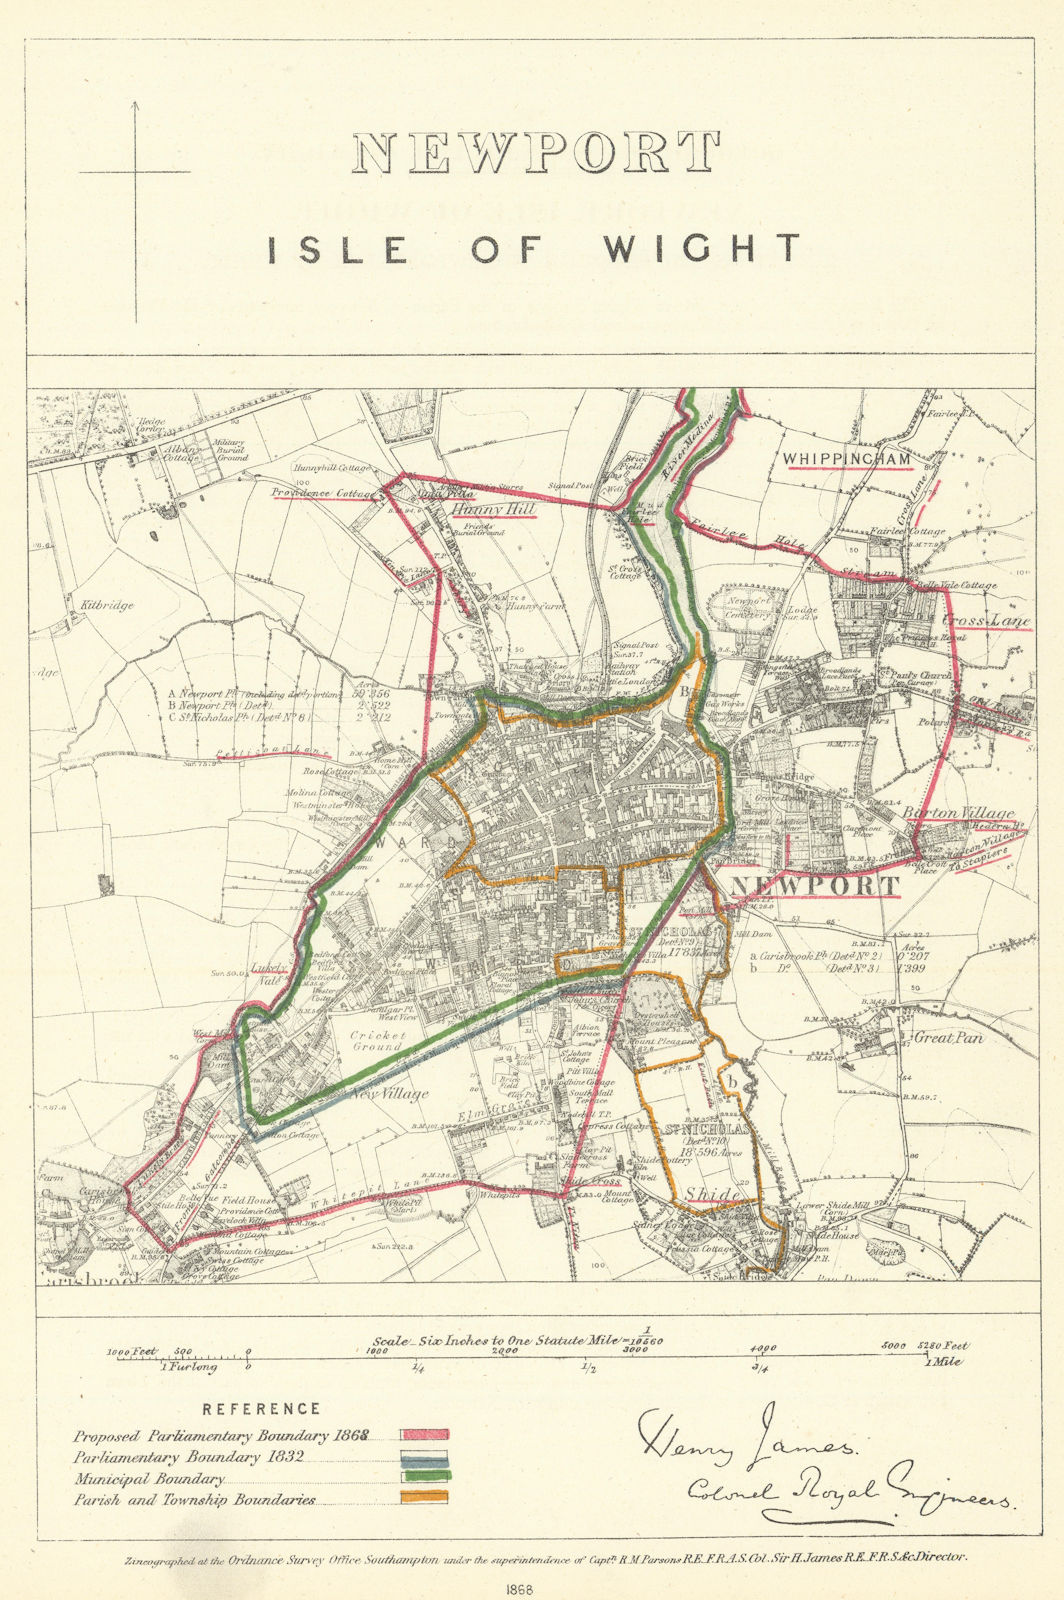 Newport, Isle of Wight. JAMES. Parliamentary Boundary Commission 1868 old map